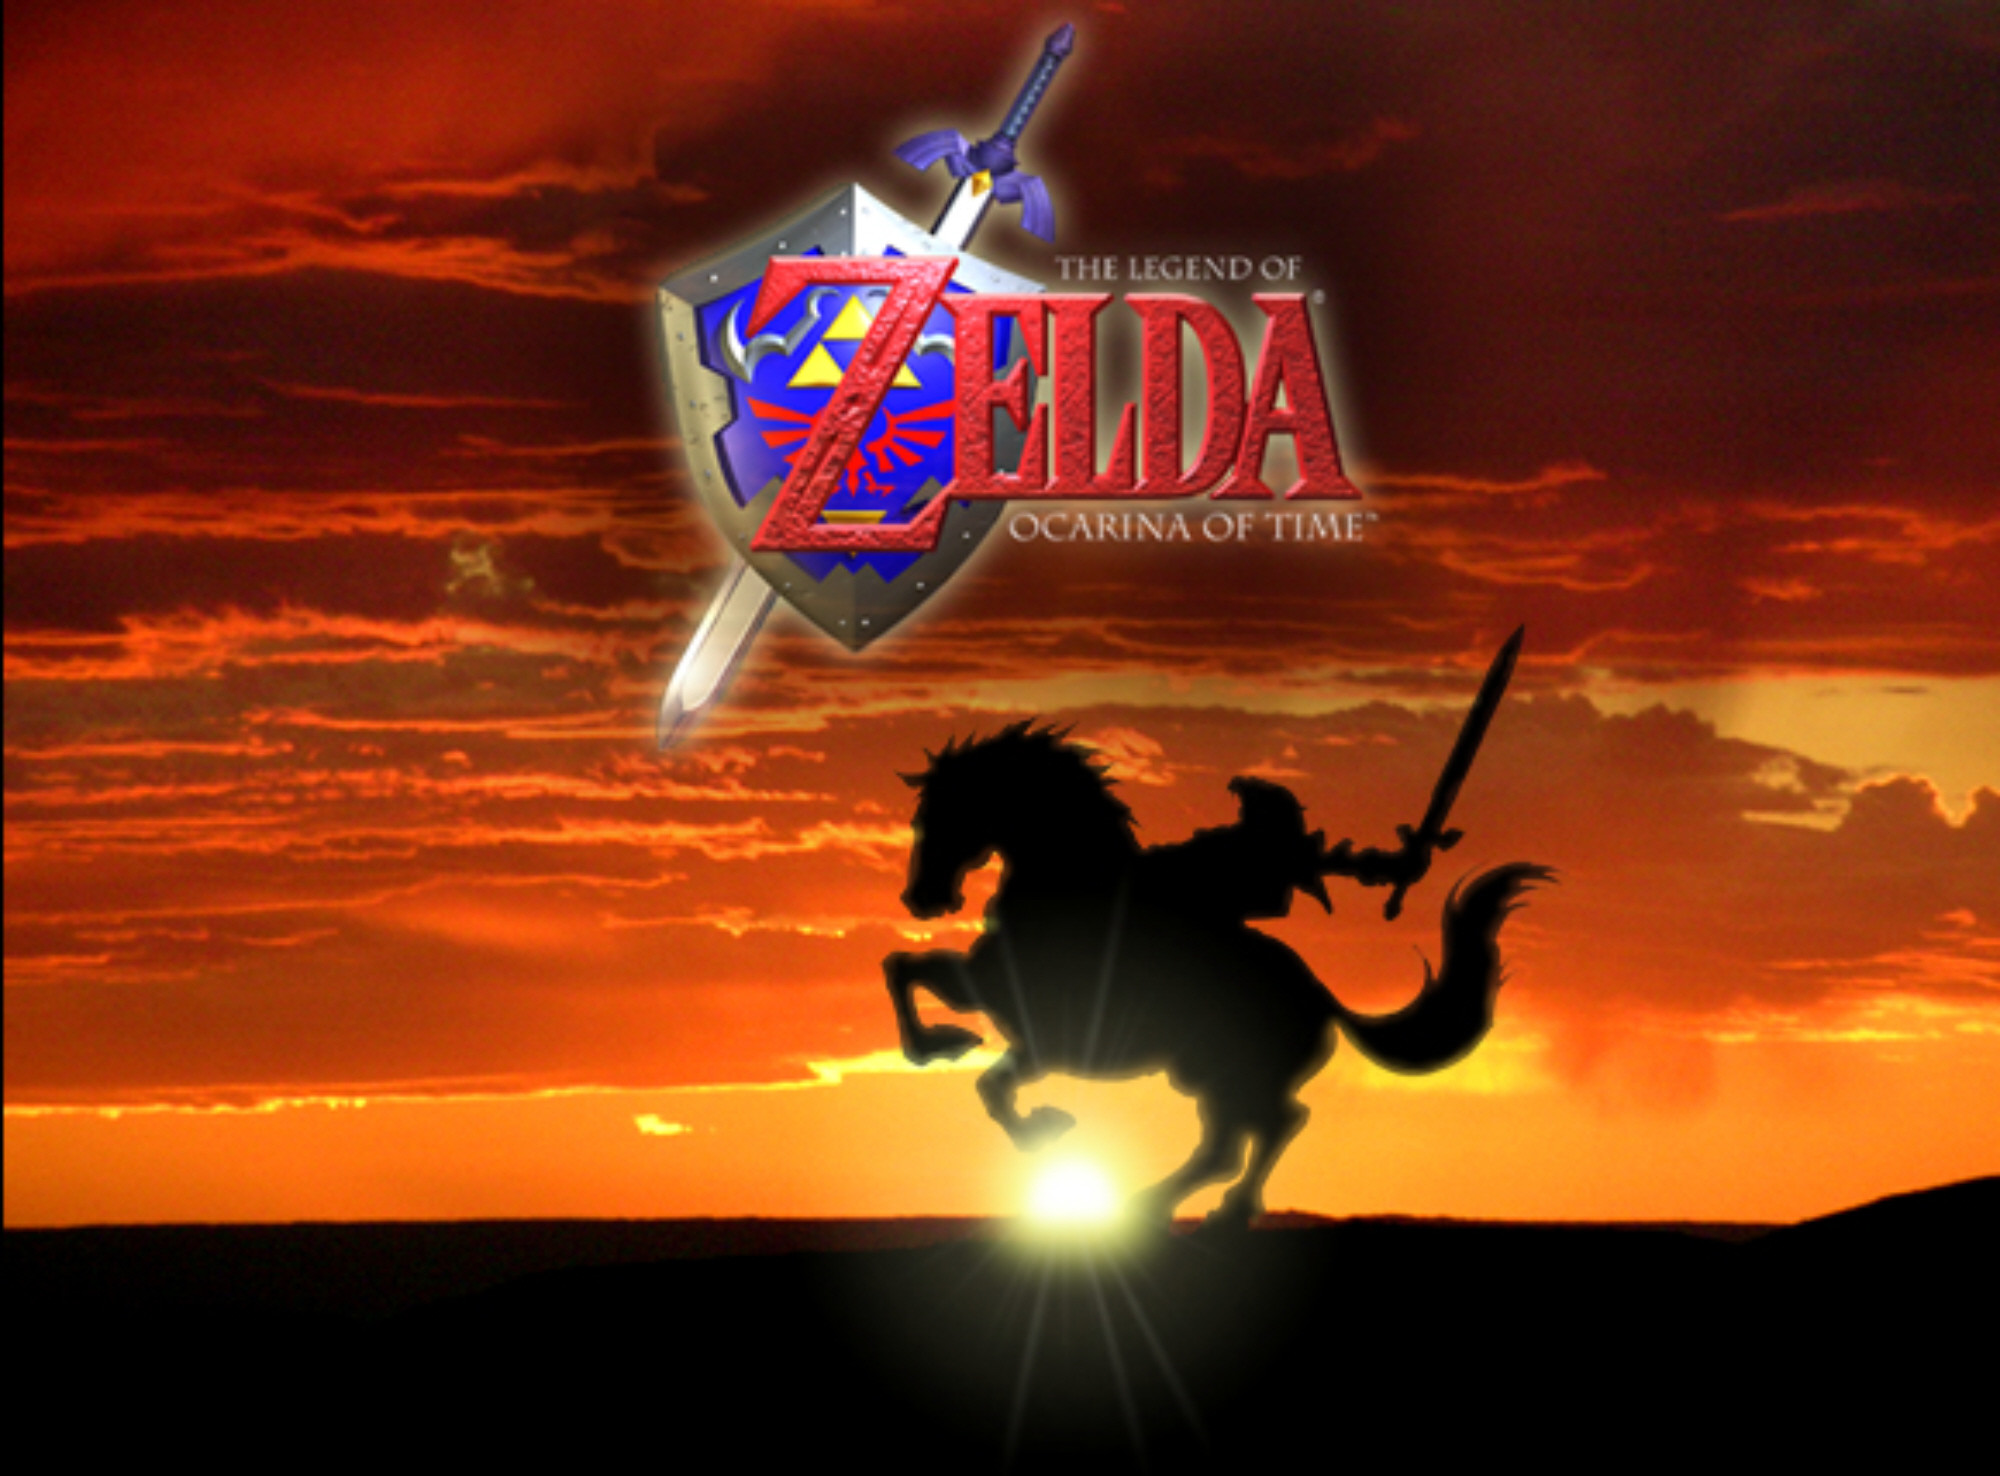 2000x1476 HD Quality The Legend of Zelda Ocarina of Time Wallpaper 6 Game .